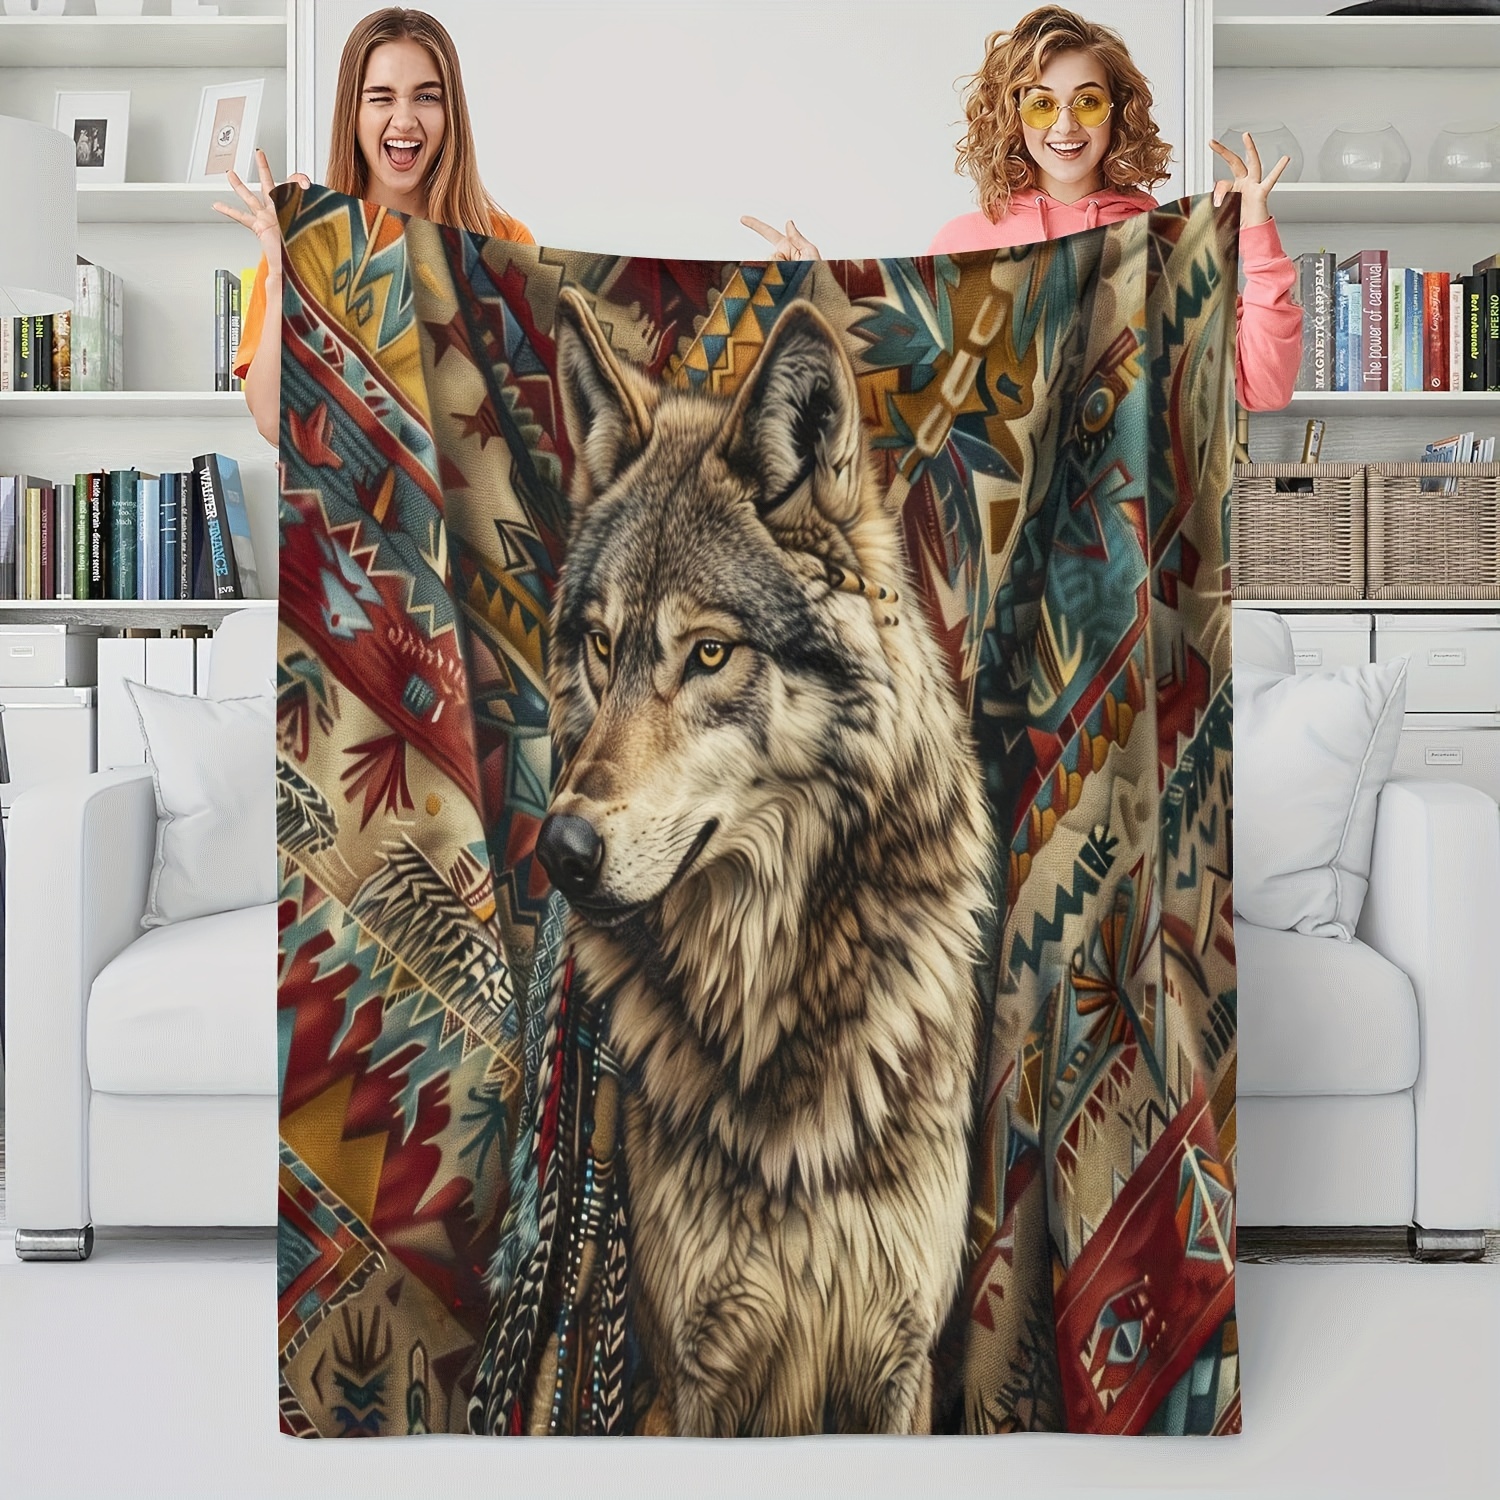 

1pc Gift Blanket For Brother Vintage Indian Totem Wolf Soft Blanket Flannel Blanket For Couch Sofa Office Bed Camping Travel, Multi-purpose Gift Blanket For All Season